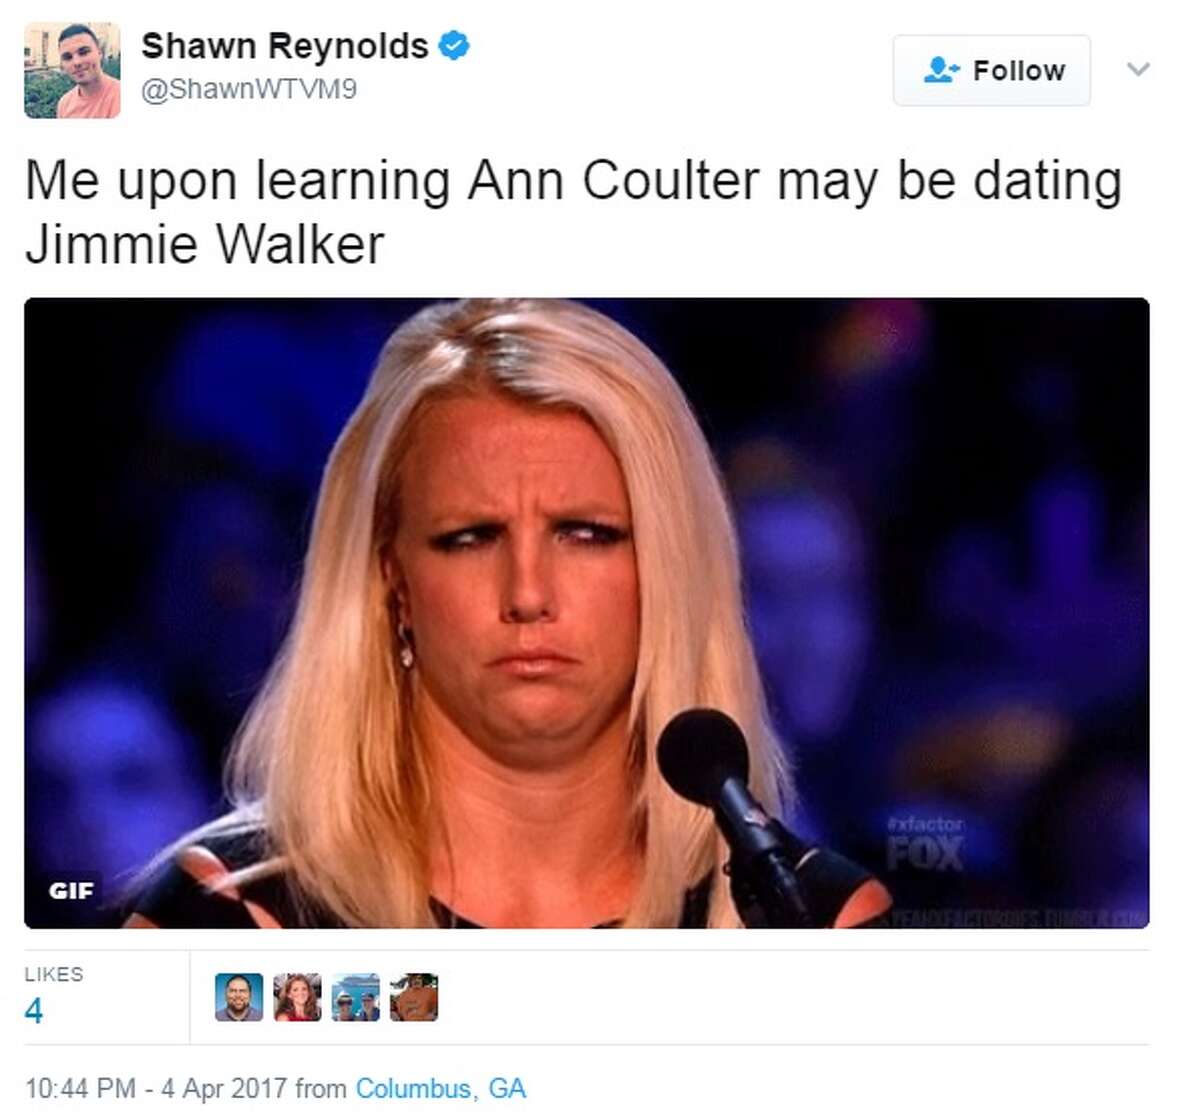 It was revealed in an Entertainment Weekly story on April 4, 2017 that Ann Coulter may be dating Jimmie Walker of the 1970's sitcom Good Times. The internet wasn't sure what to make of the news. Image source: Twitter